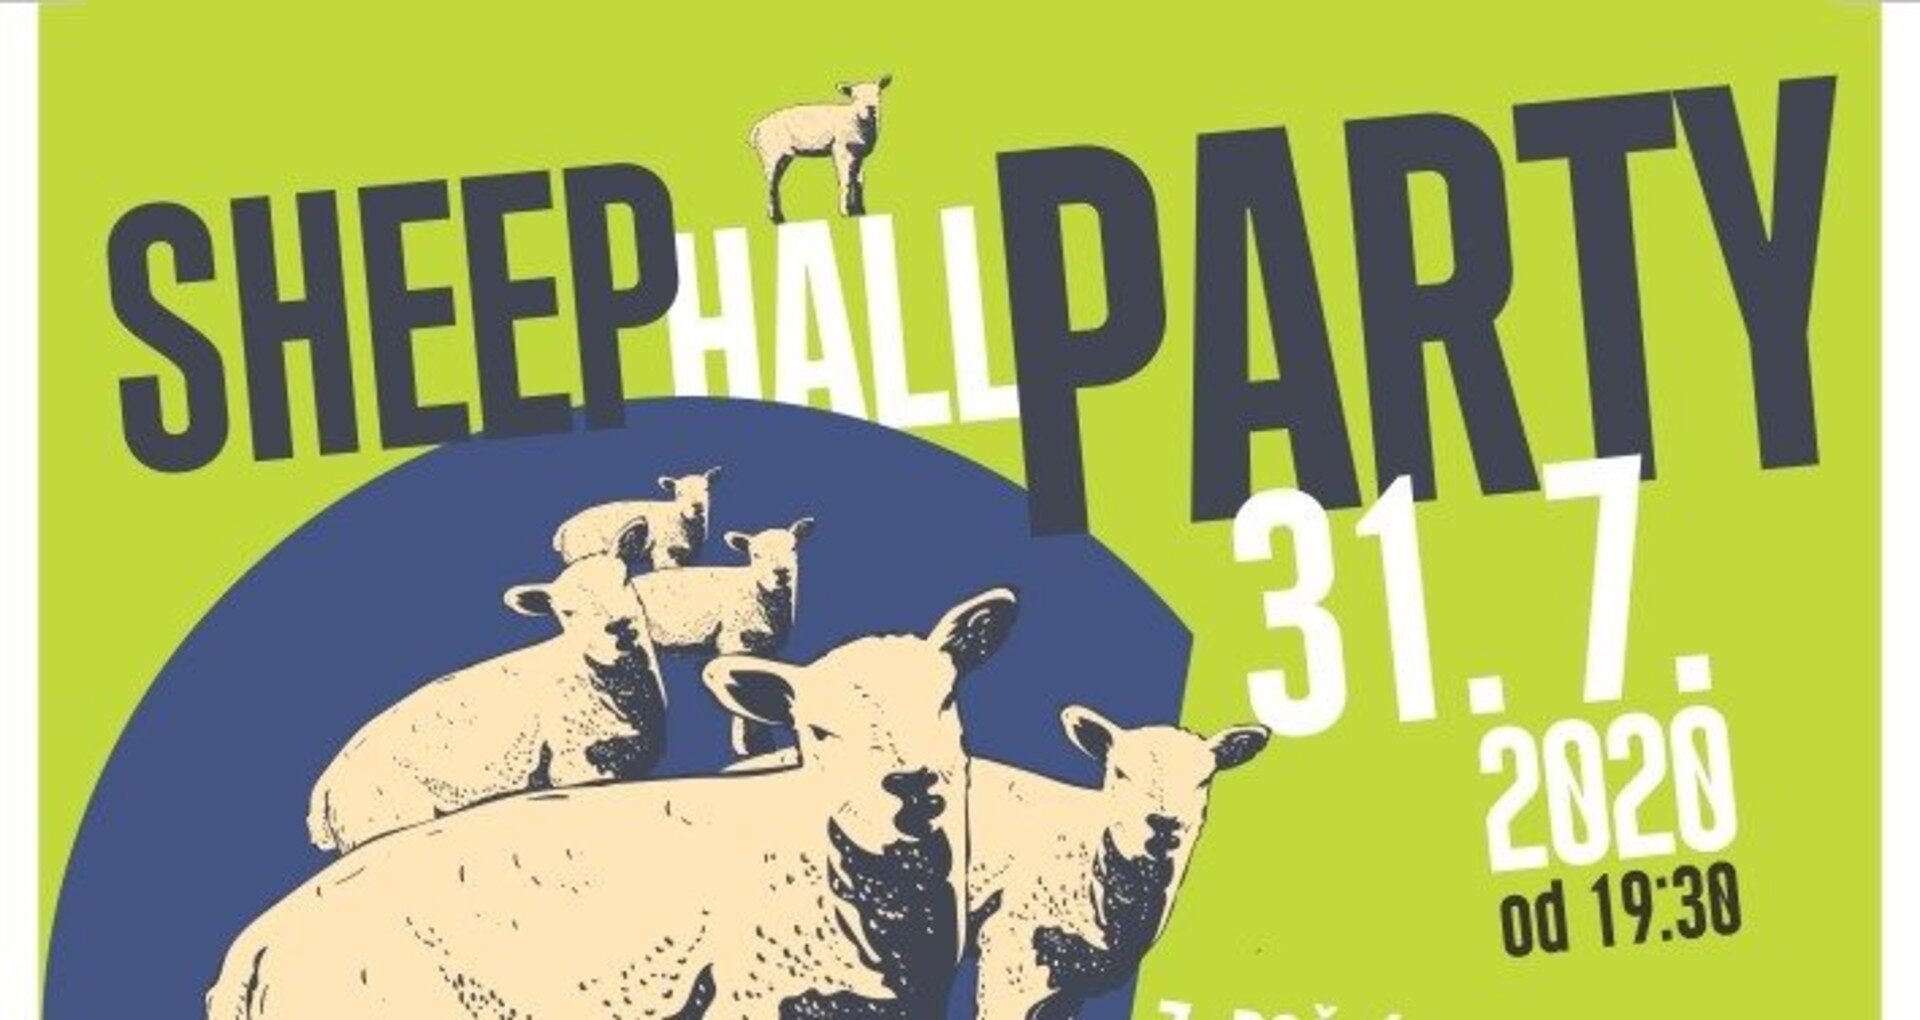 Sheep Hall Party 